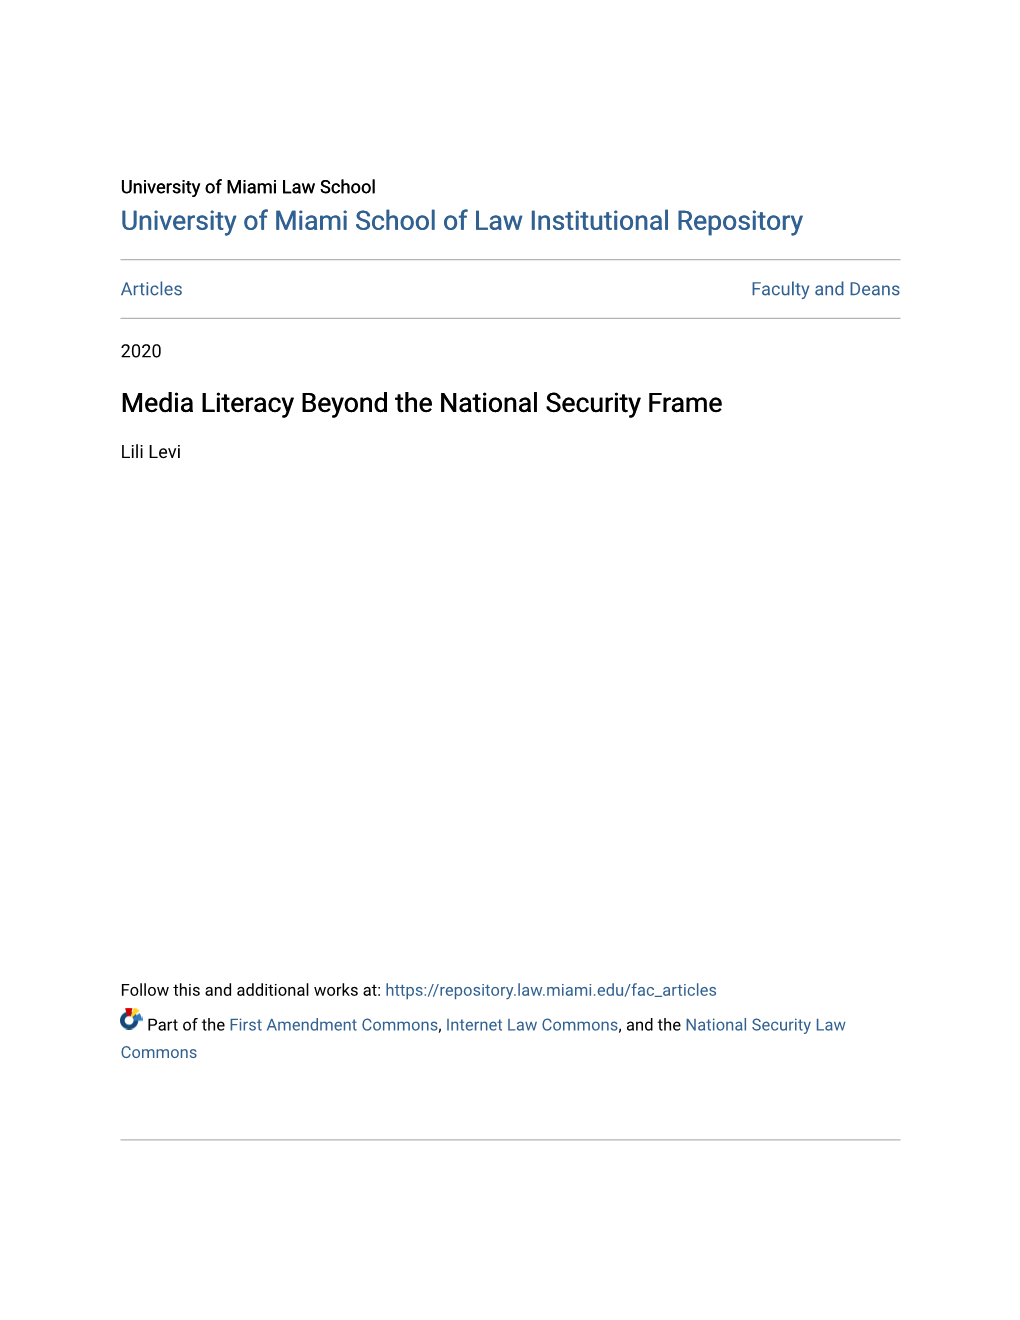 Media Literacy Beyond the National Security Frame